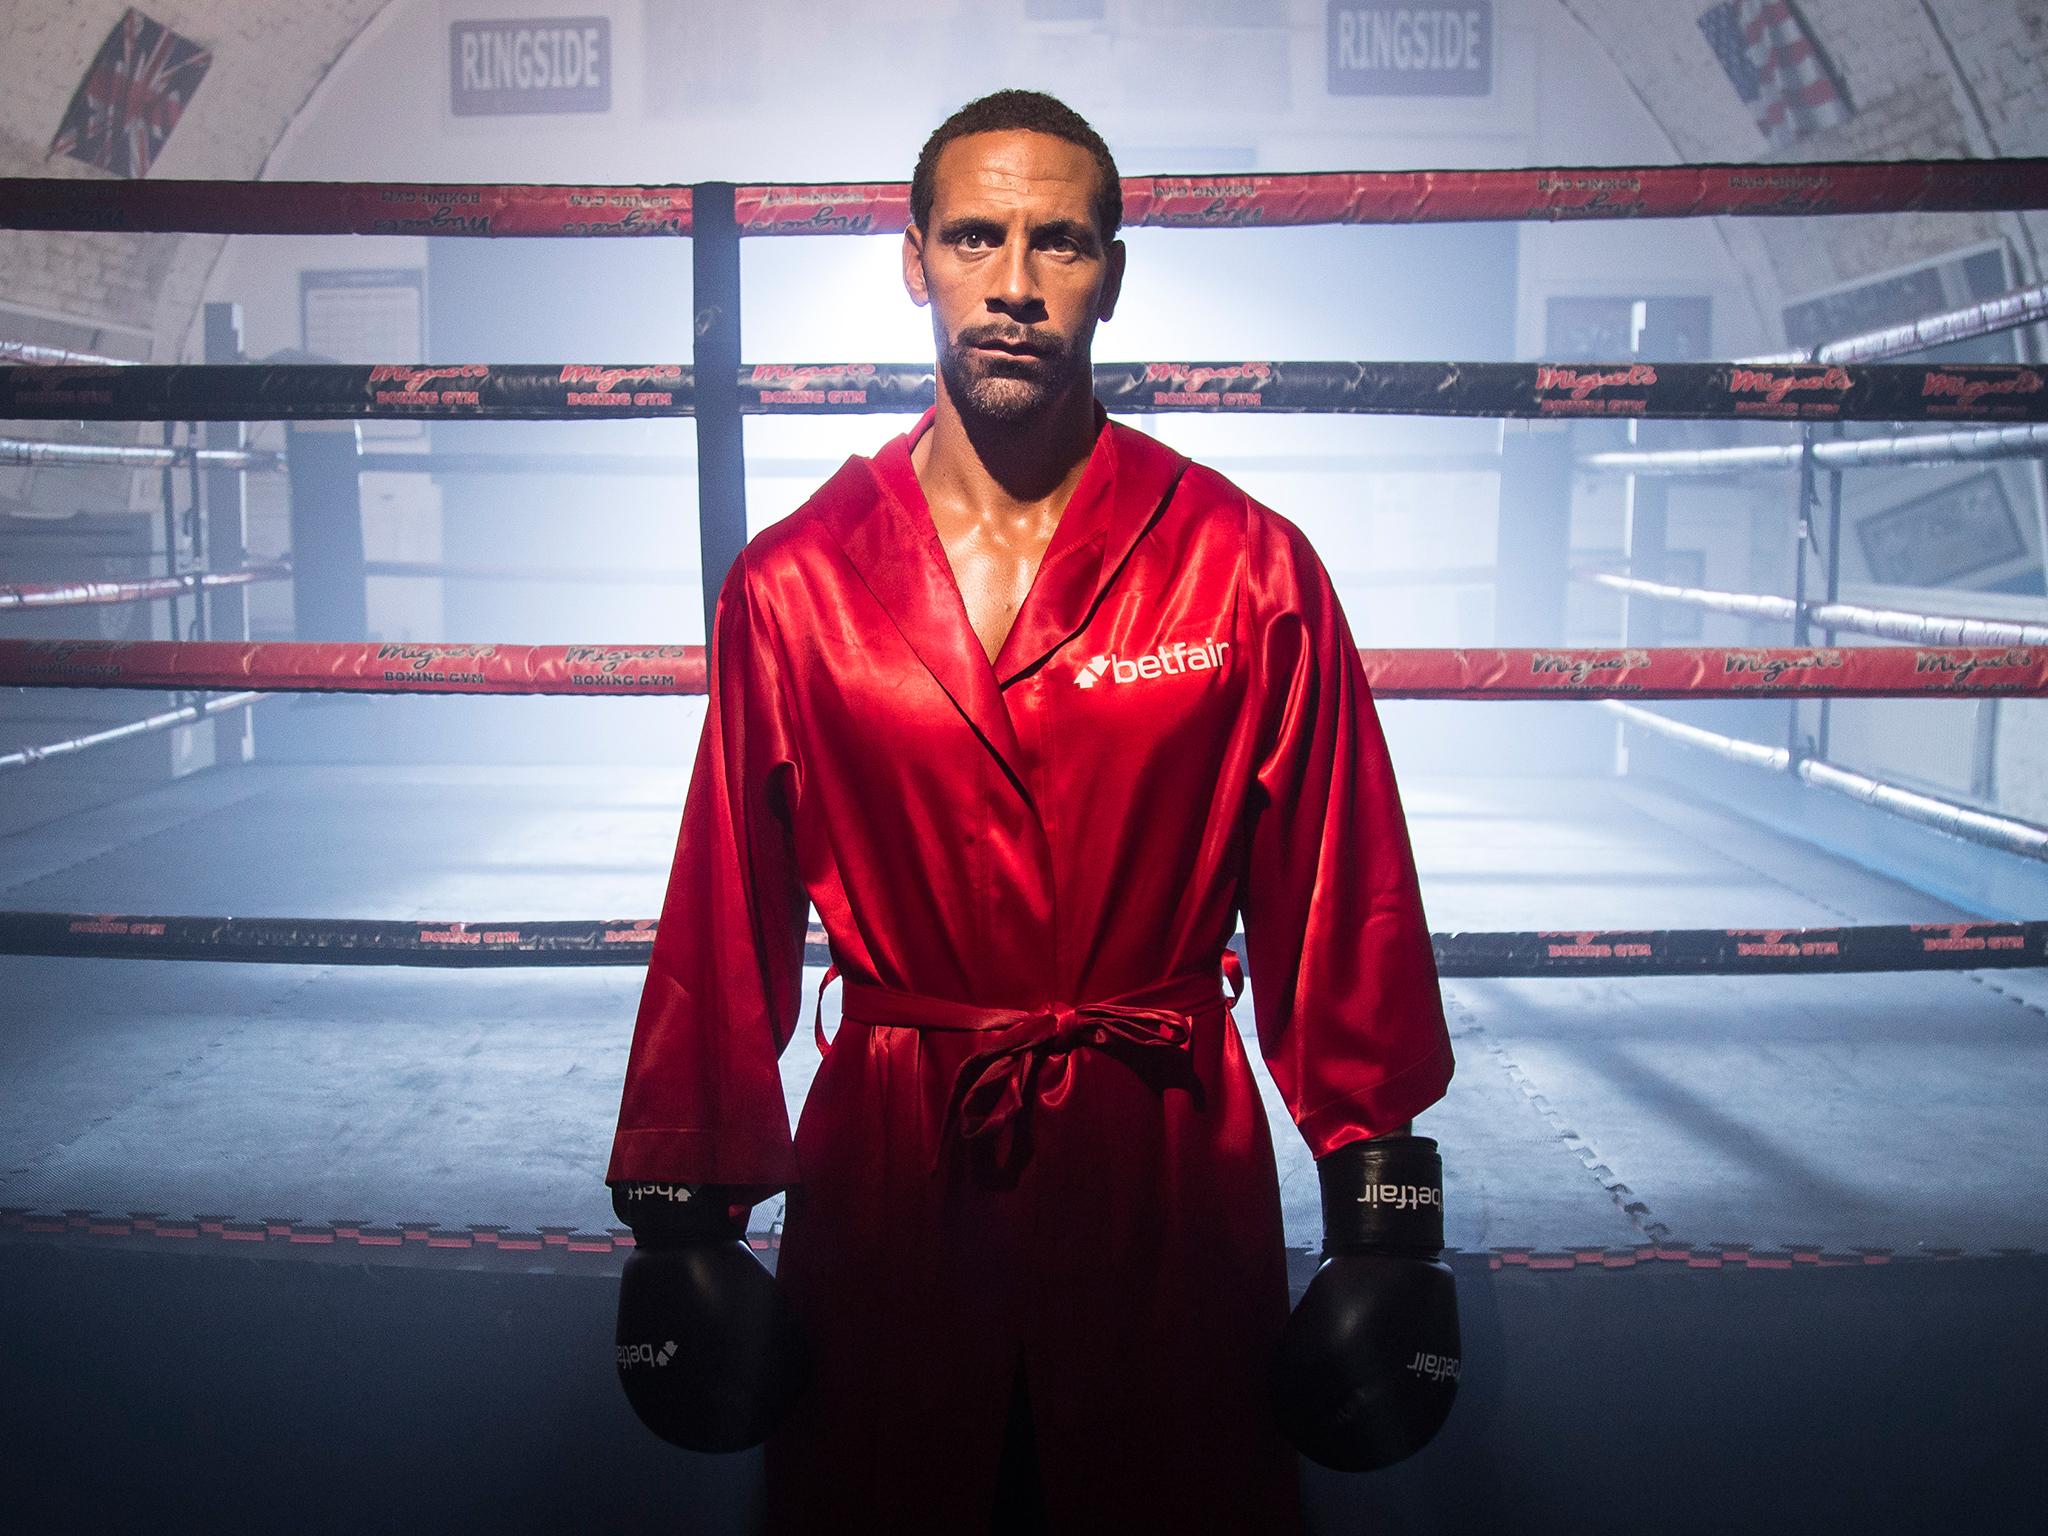 Rio Ferdinand plans to launch a professional boxing career